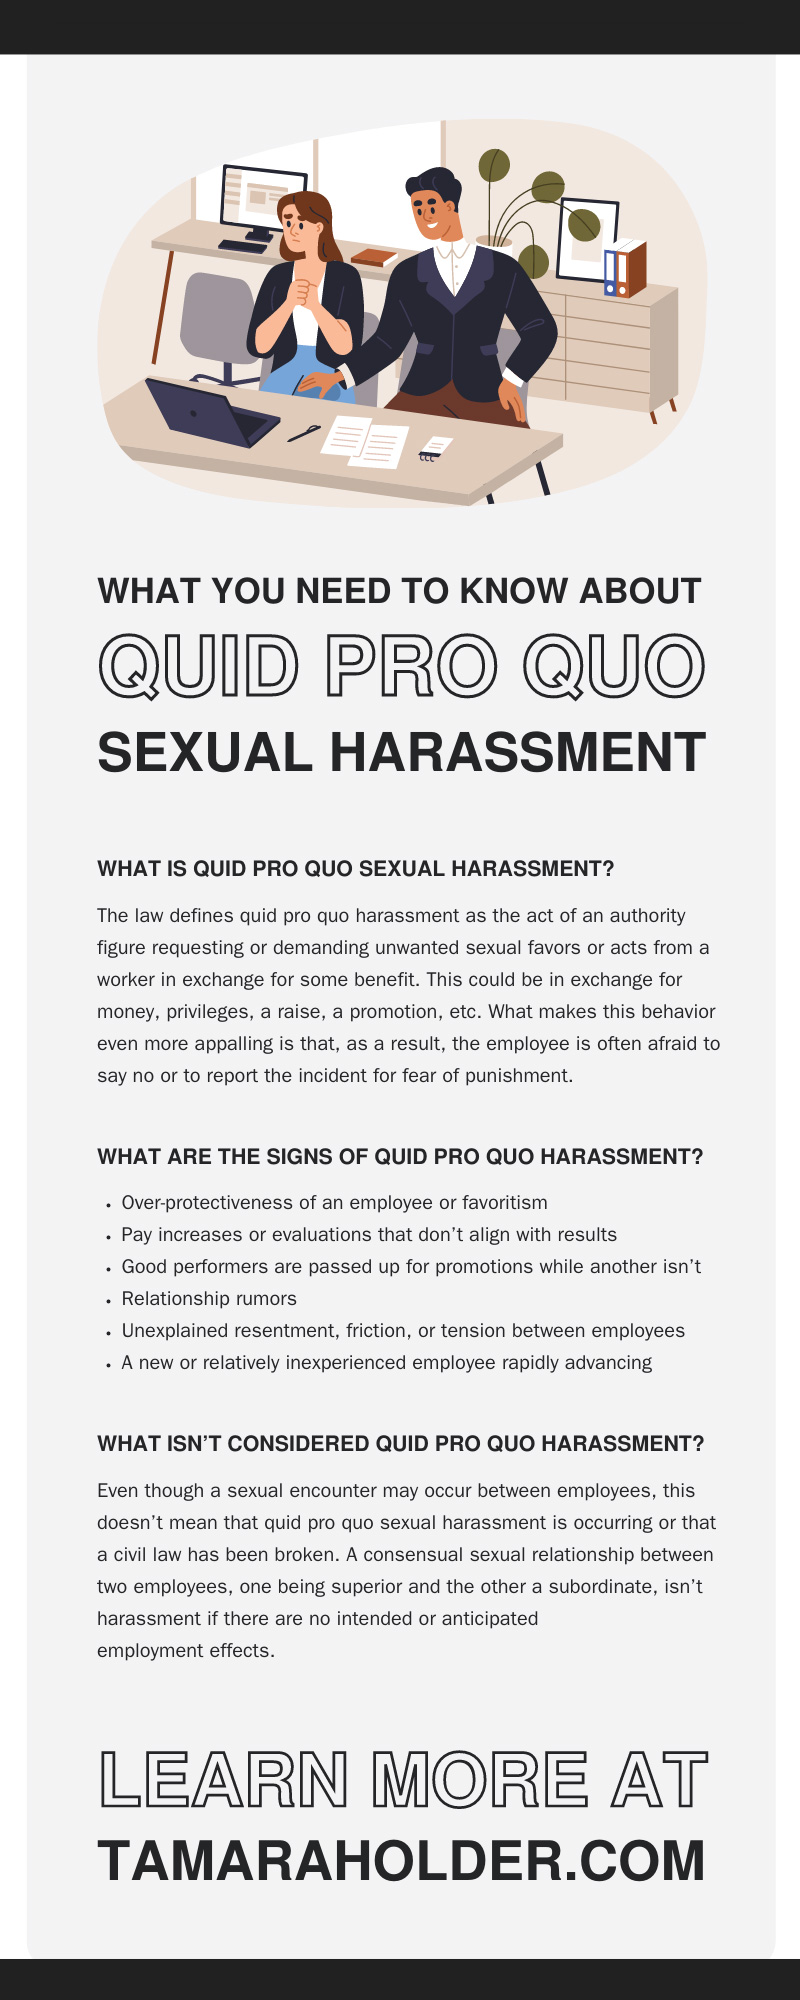 What You Need To Know About Quid Pro Quo Sexual Harassment